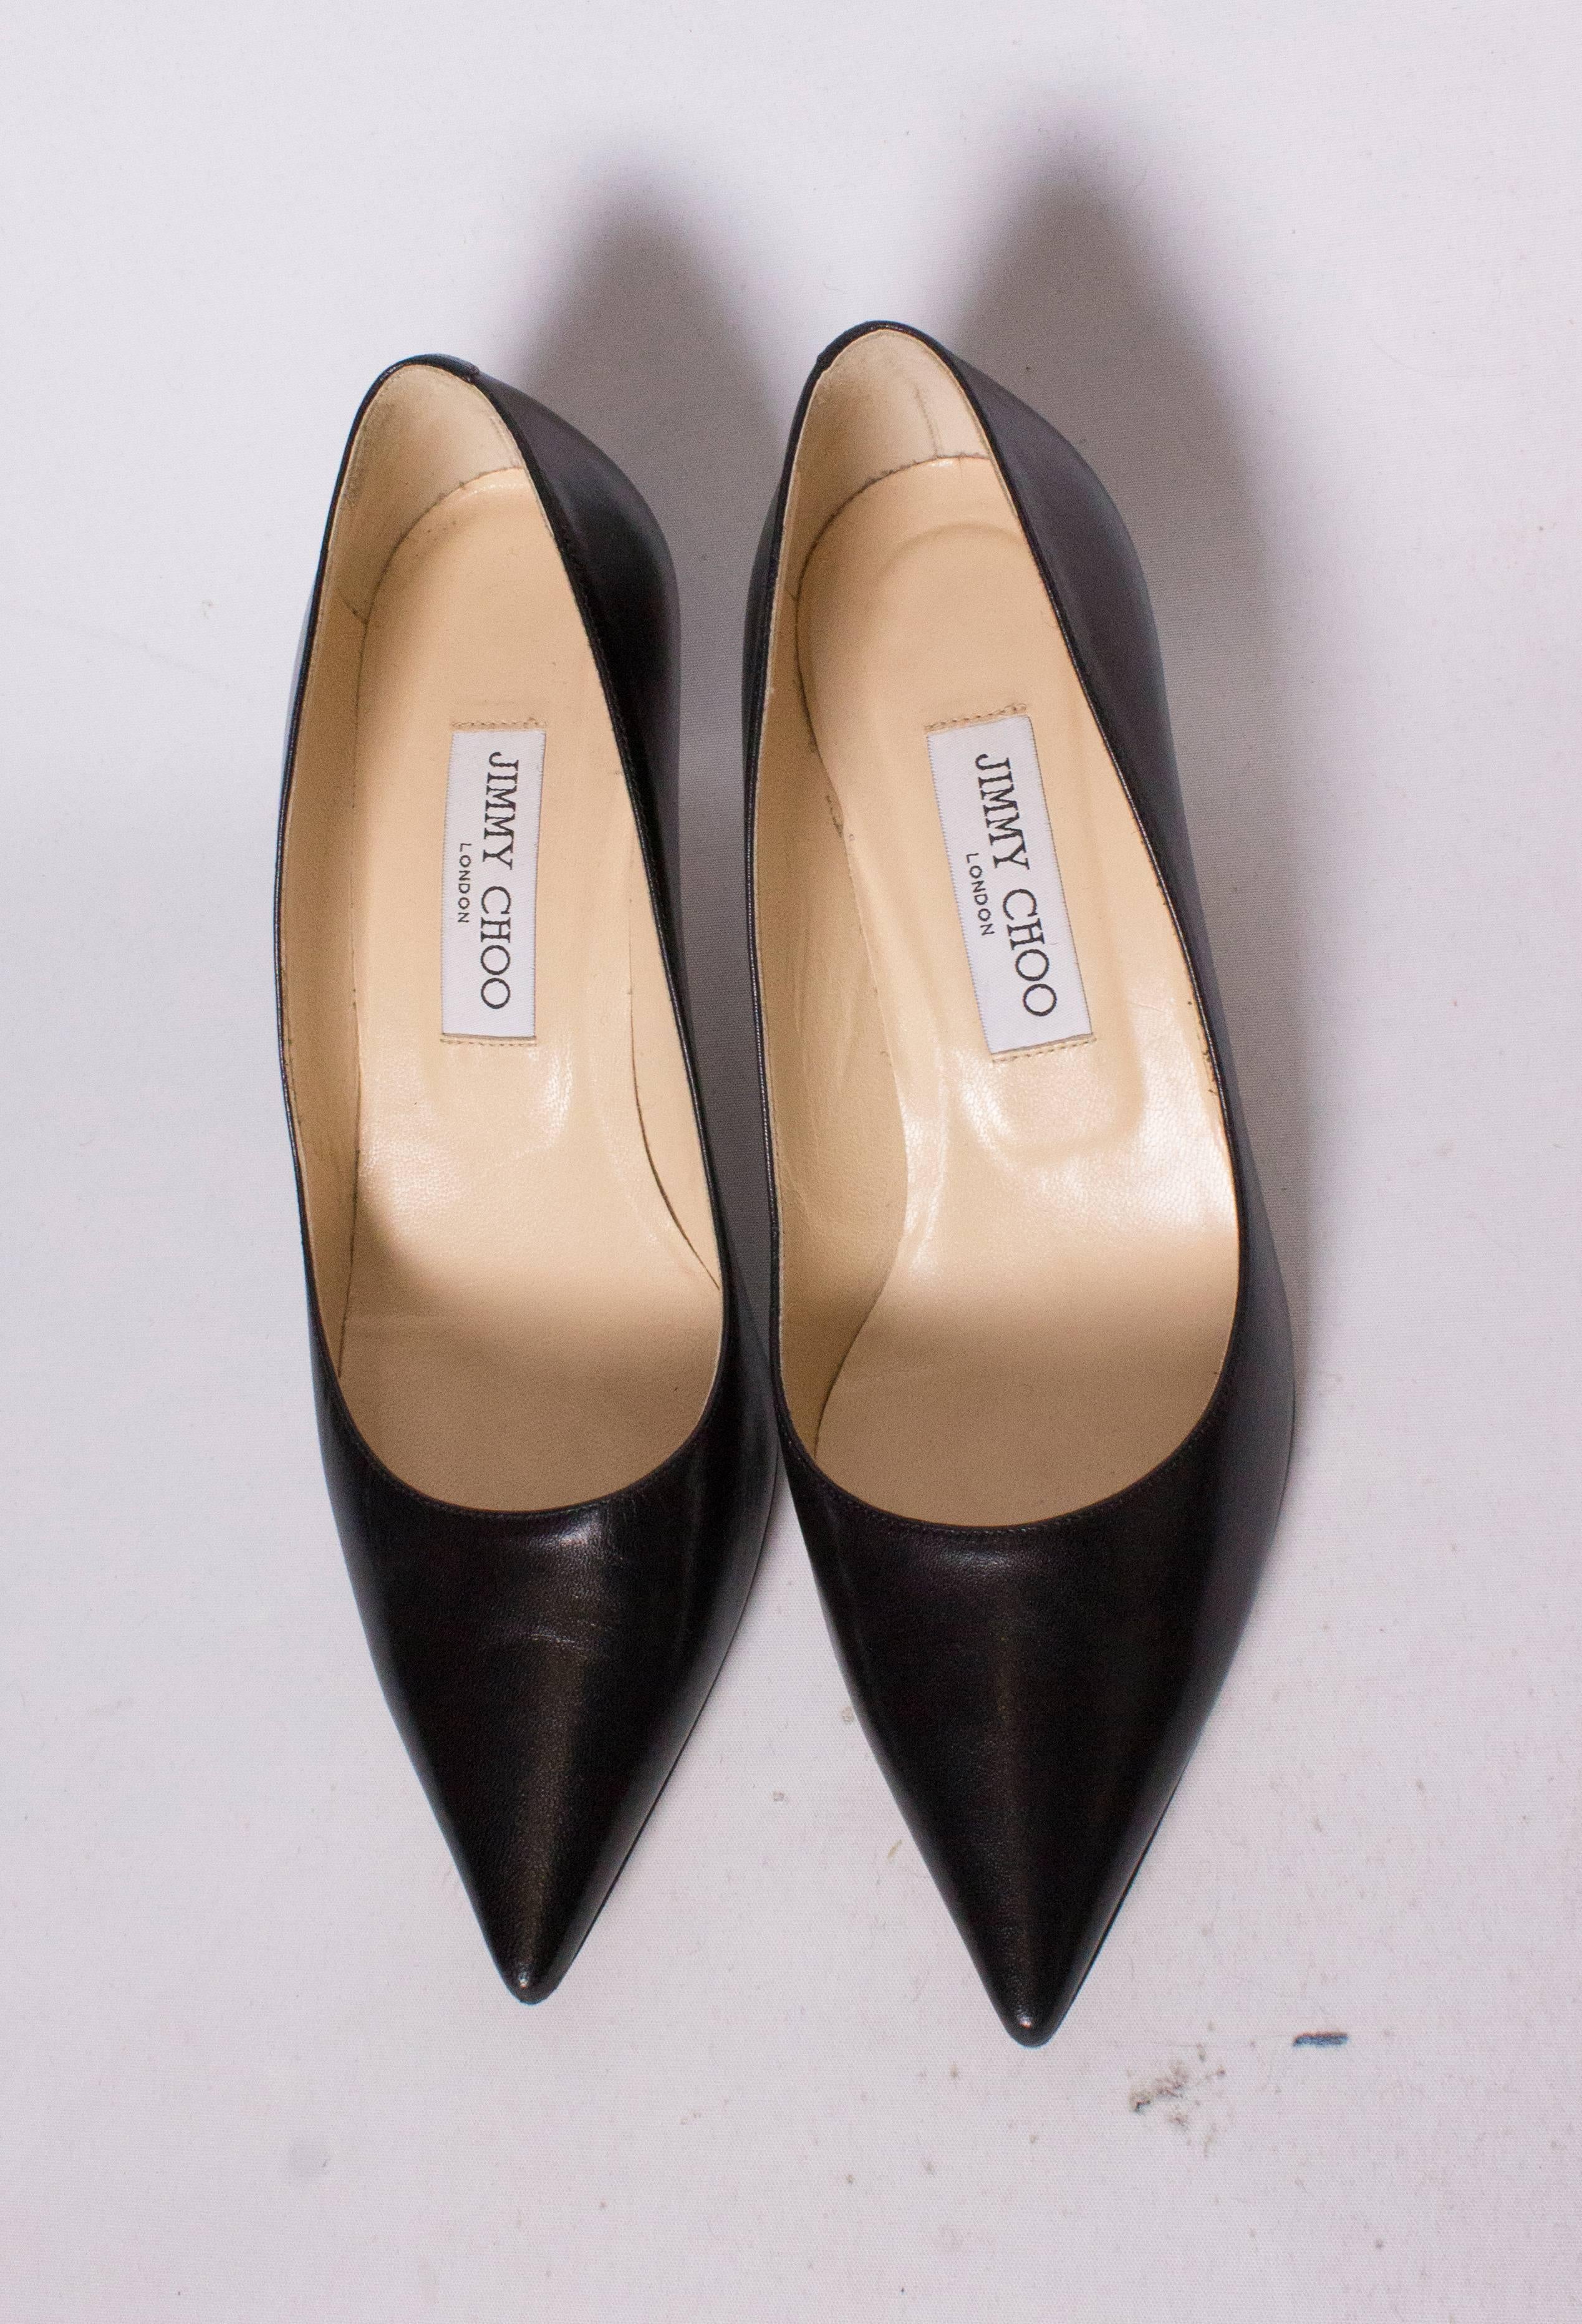 A chic pair of Jimmy Choo kitten heels. They are in black leather and in execellent condition.